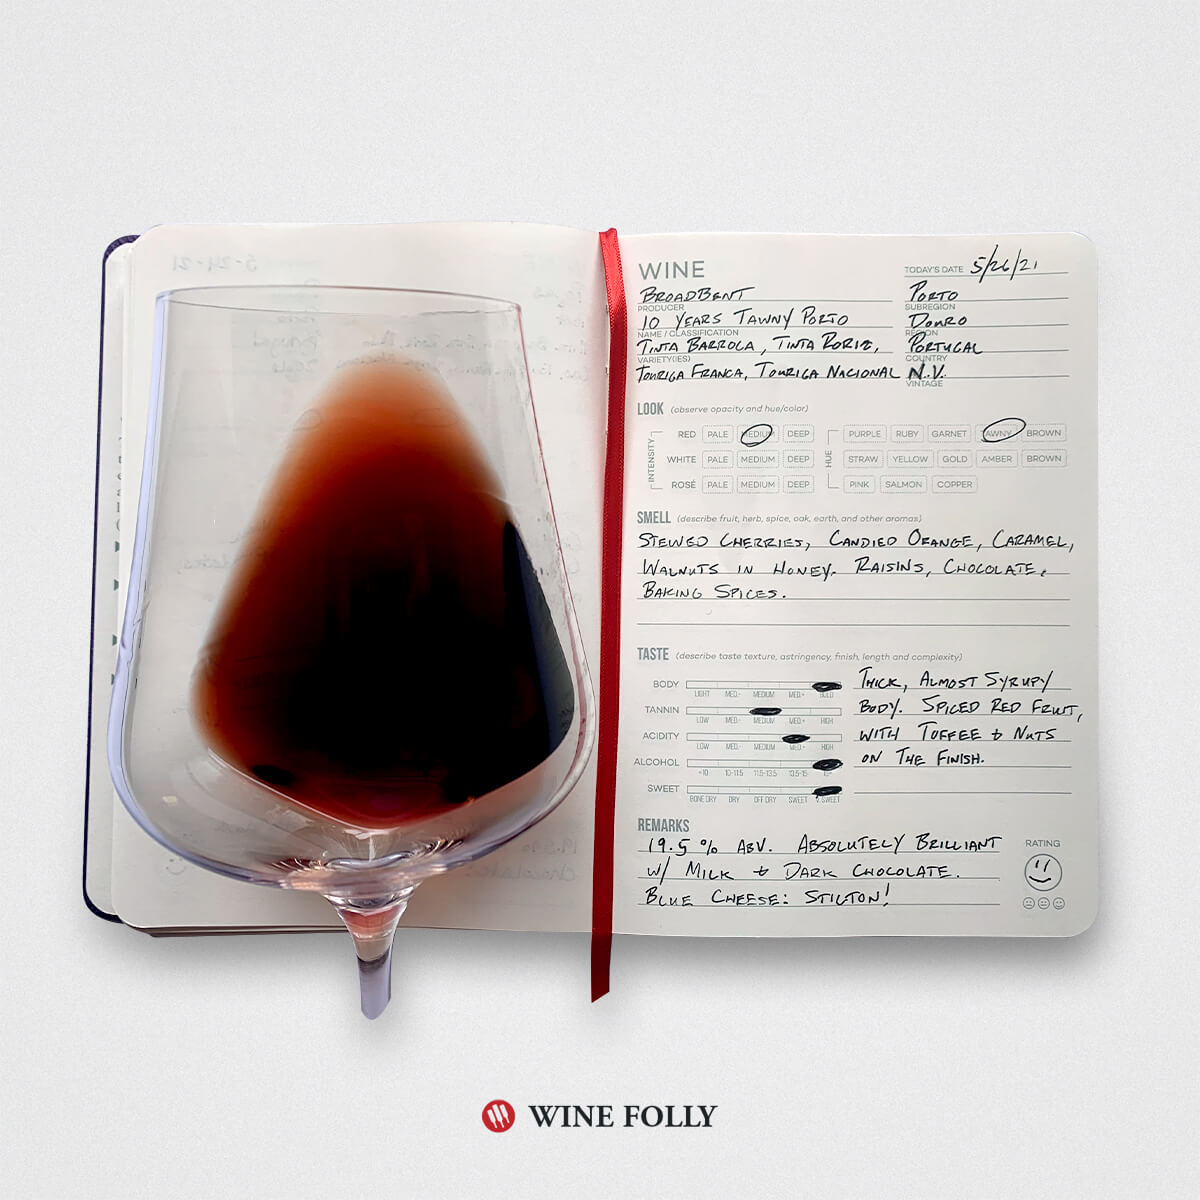 Journal entry for Tawny Port with a glass of wine